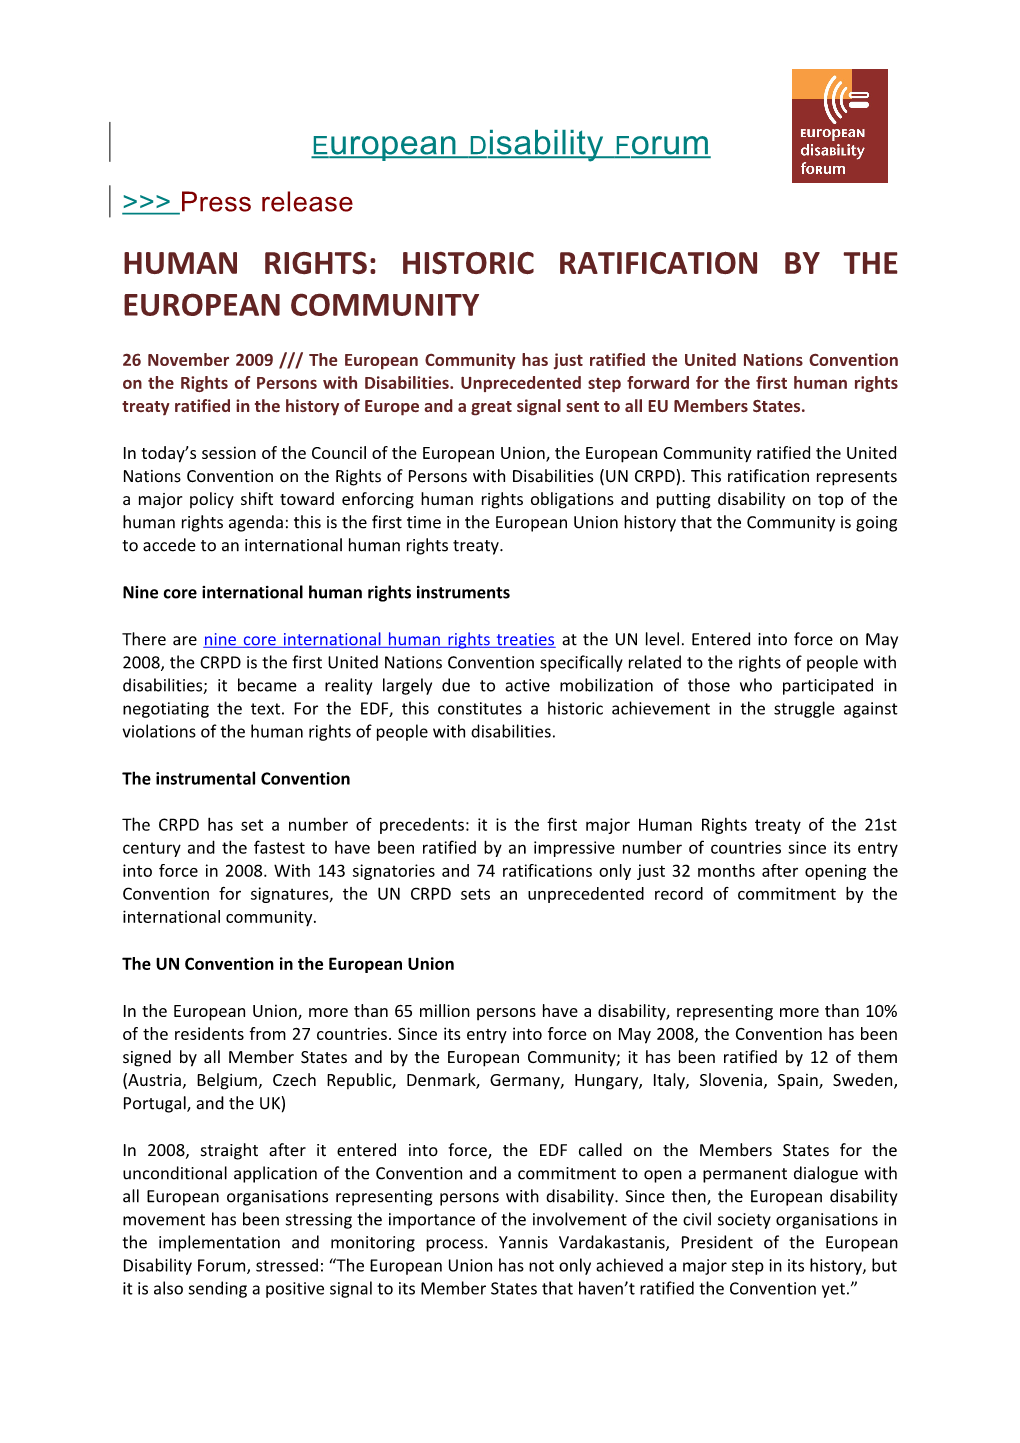 Human Rights: Historic Ratification by the European Community